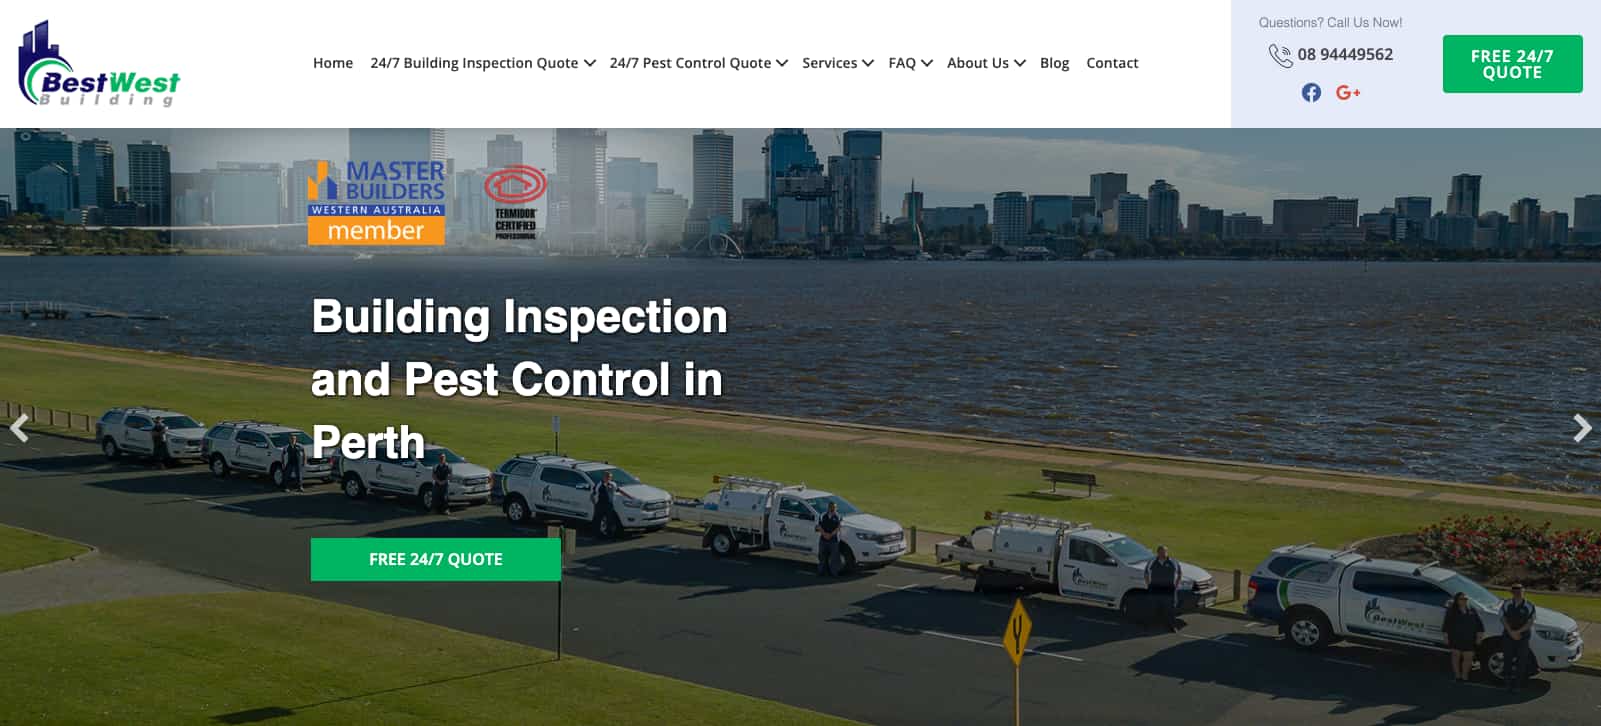 Bestwest Building Inspections and Pest Control